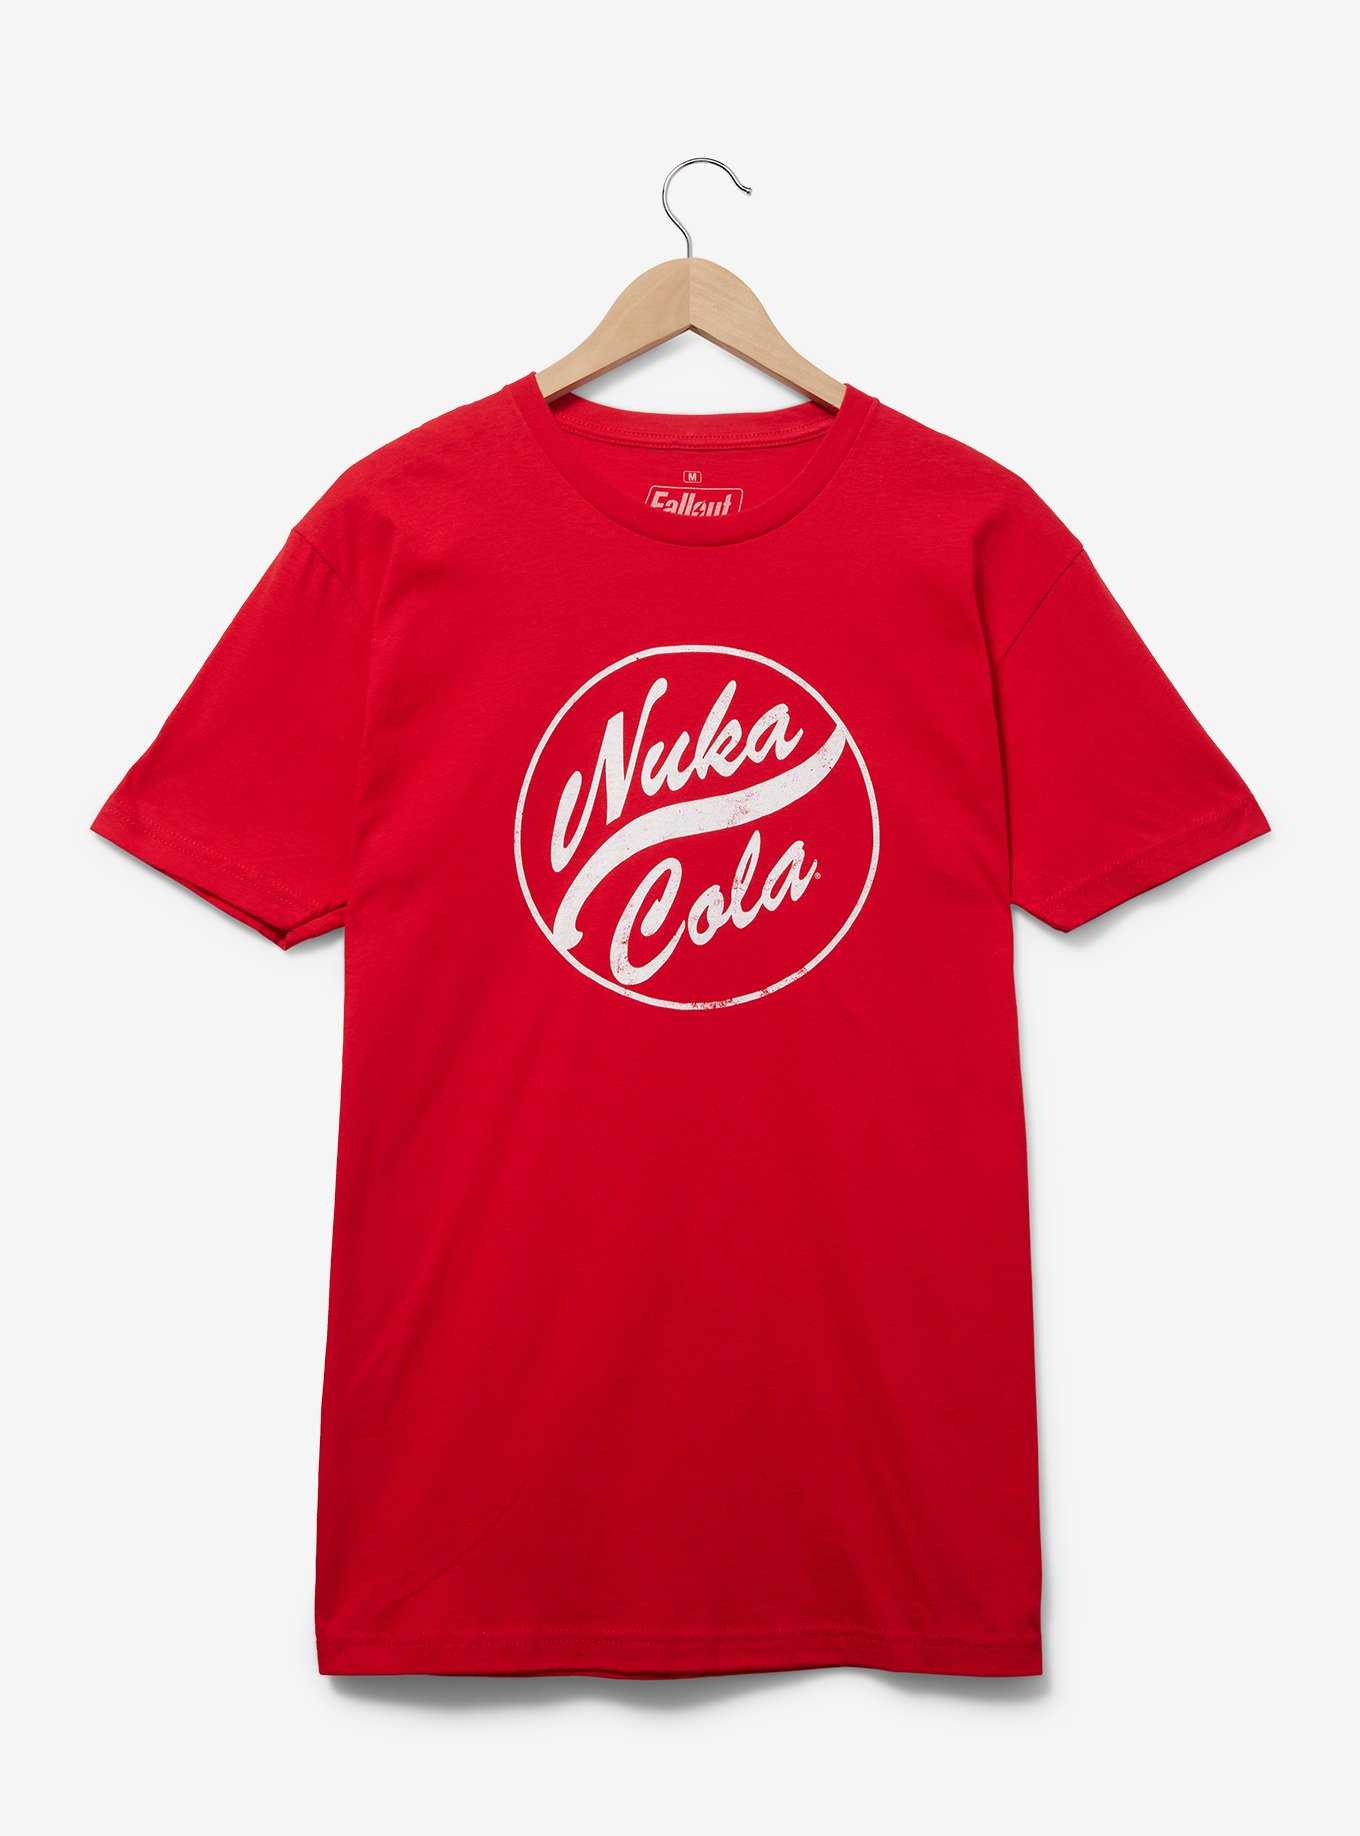 Fallout Nuka Cola T-Shirt - BoxLunch Exclusive, , hi-res